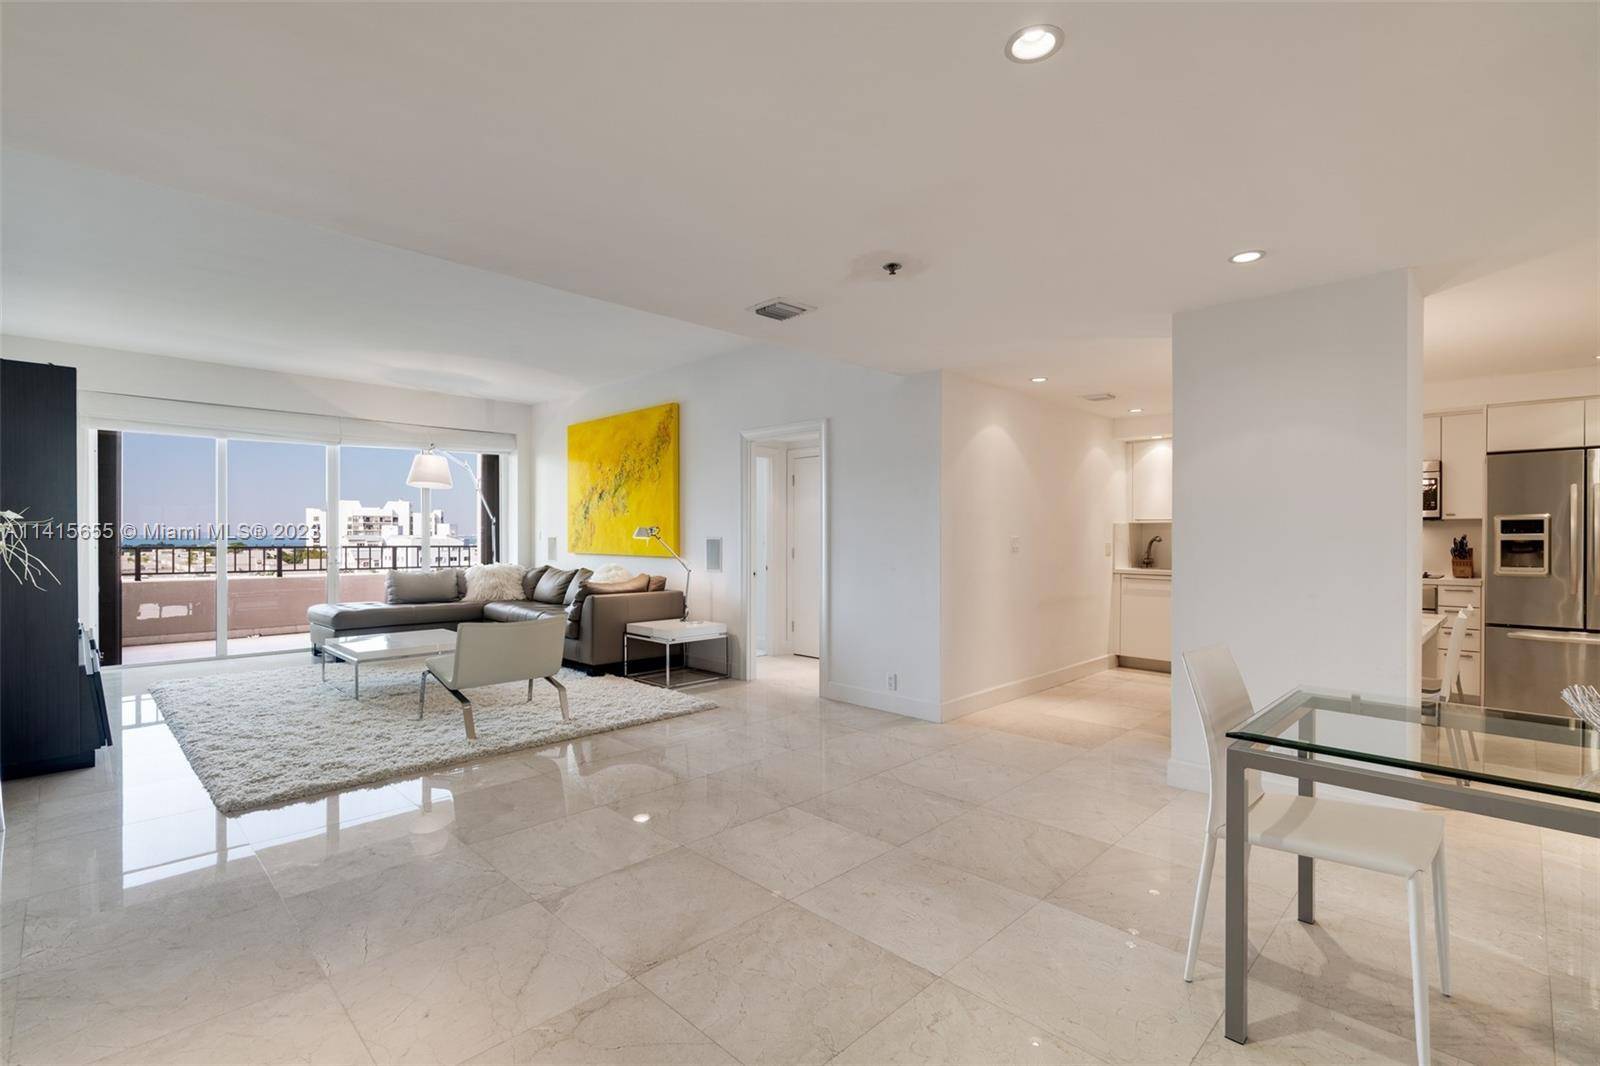 Enjoy all the amenities Key Colony has to offer at this remodeled 2 bedroom 2 bath oceanfront unit at Key Colony's Oceansound, located directly on Key Biscayne's finest beach.